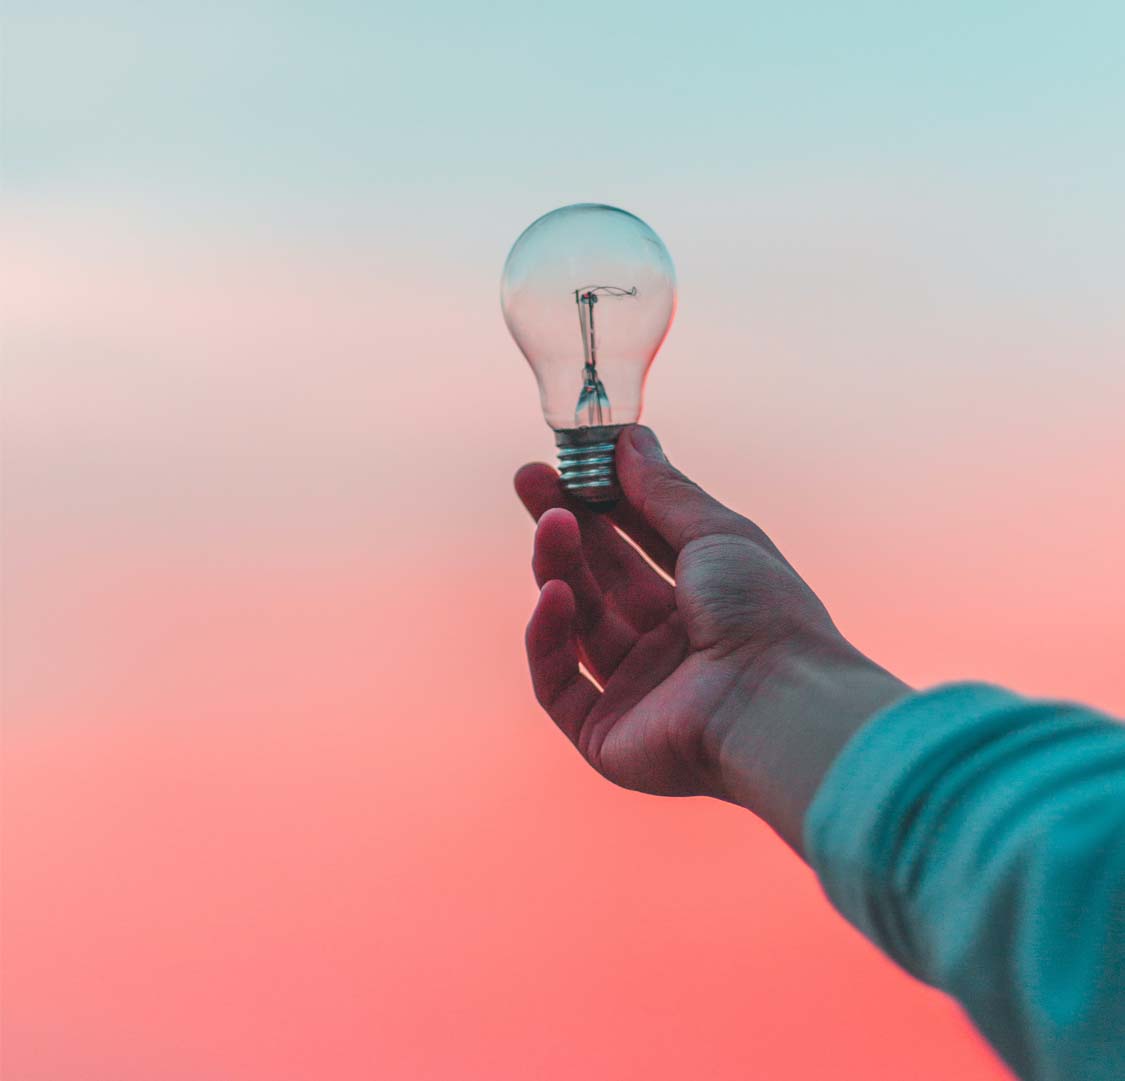 Inspires: a human hand holding a lightbulb in front of a beautiful backdrop of a sunset sky filled with pink and blue colours.